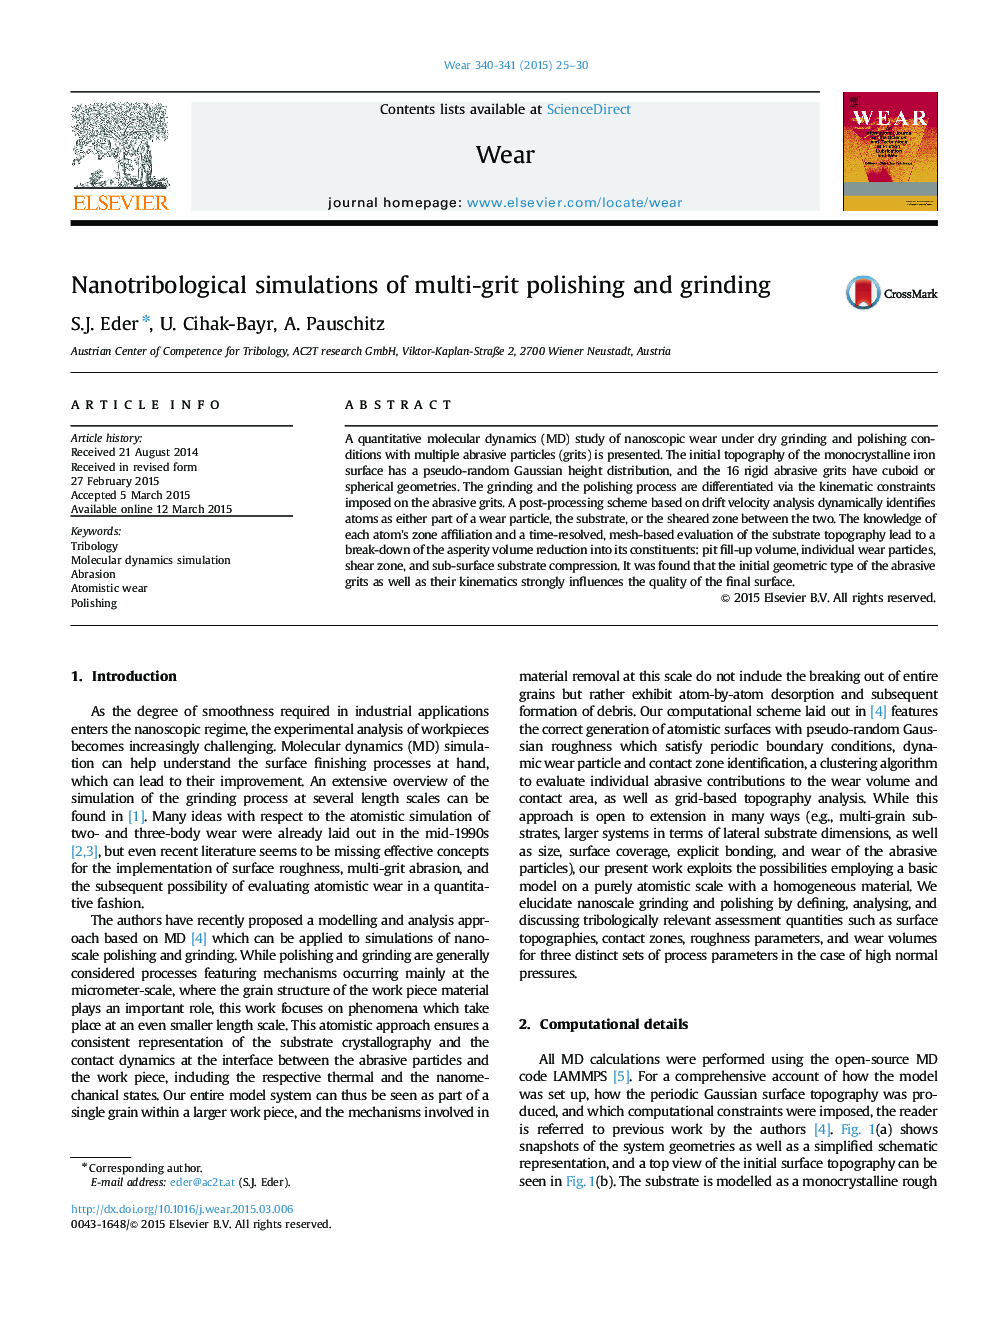 Nanotribological simulations of multi-grit polishing and grinding